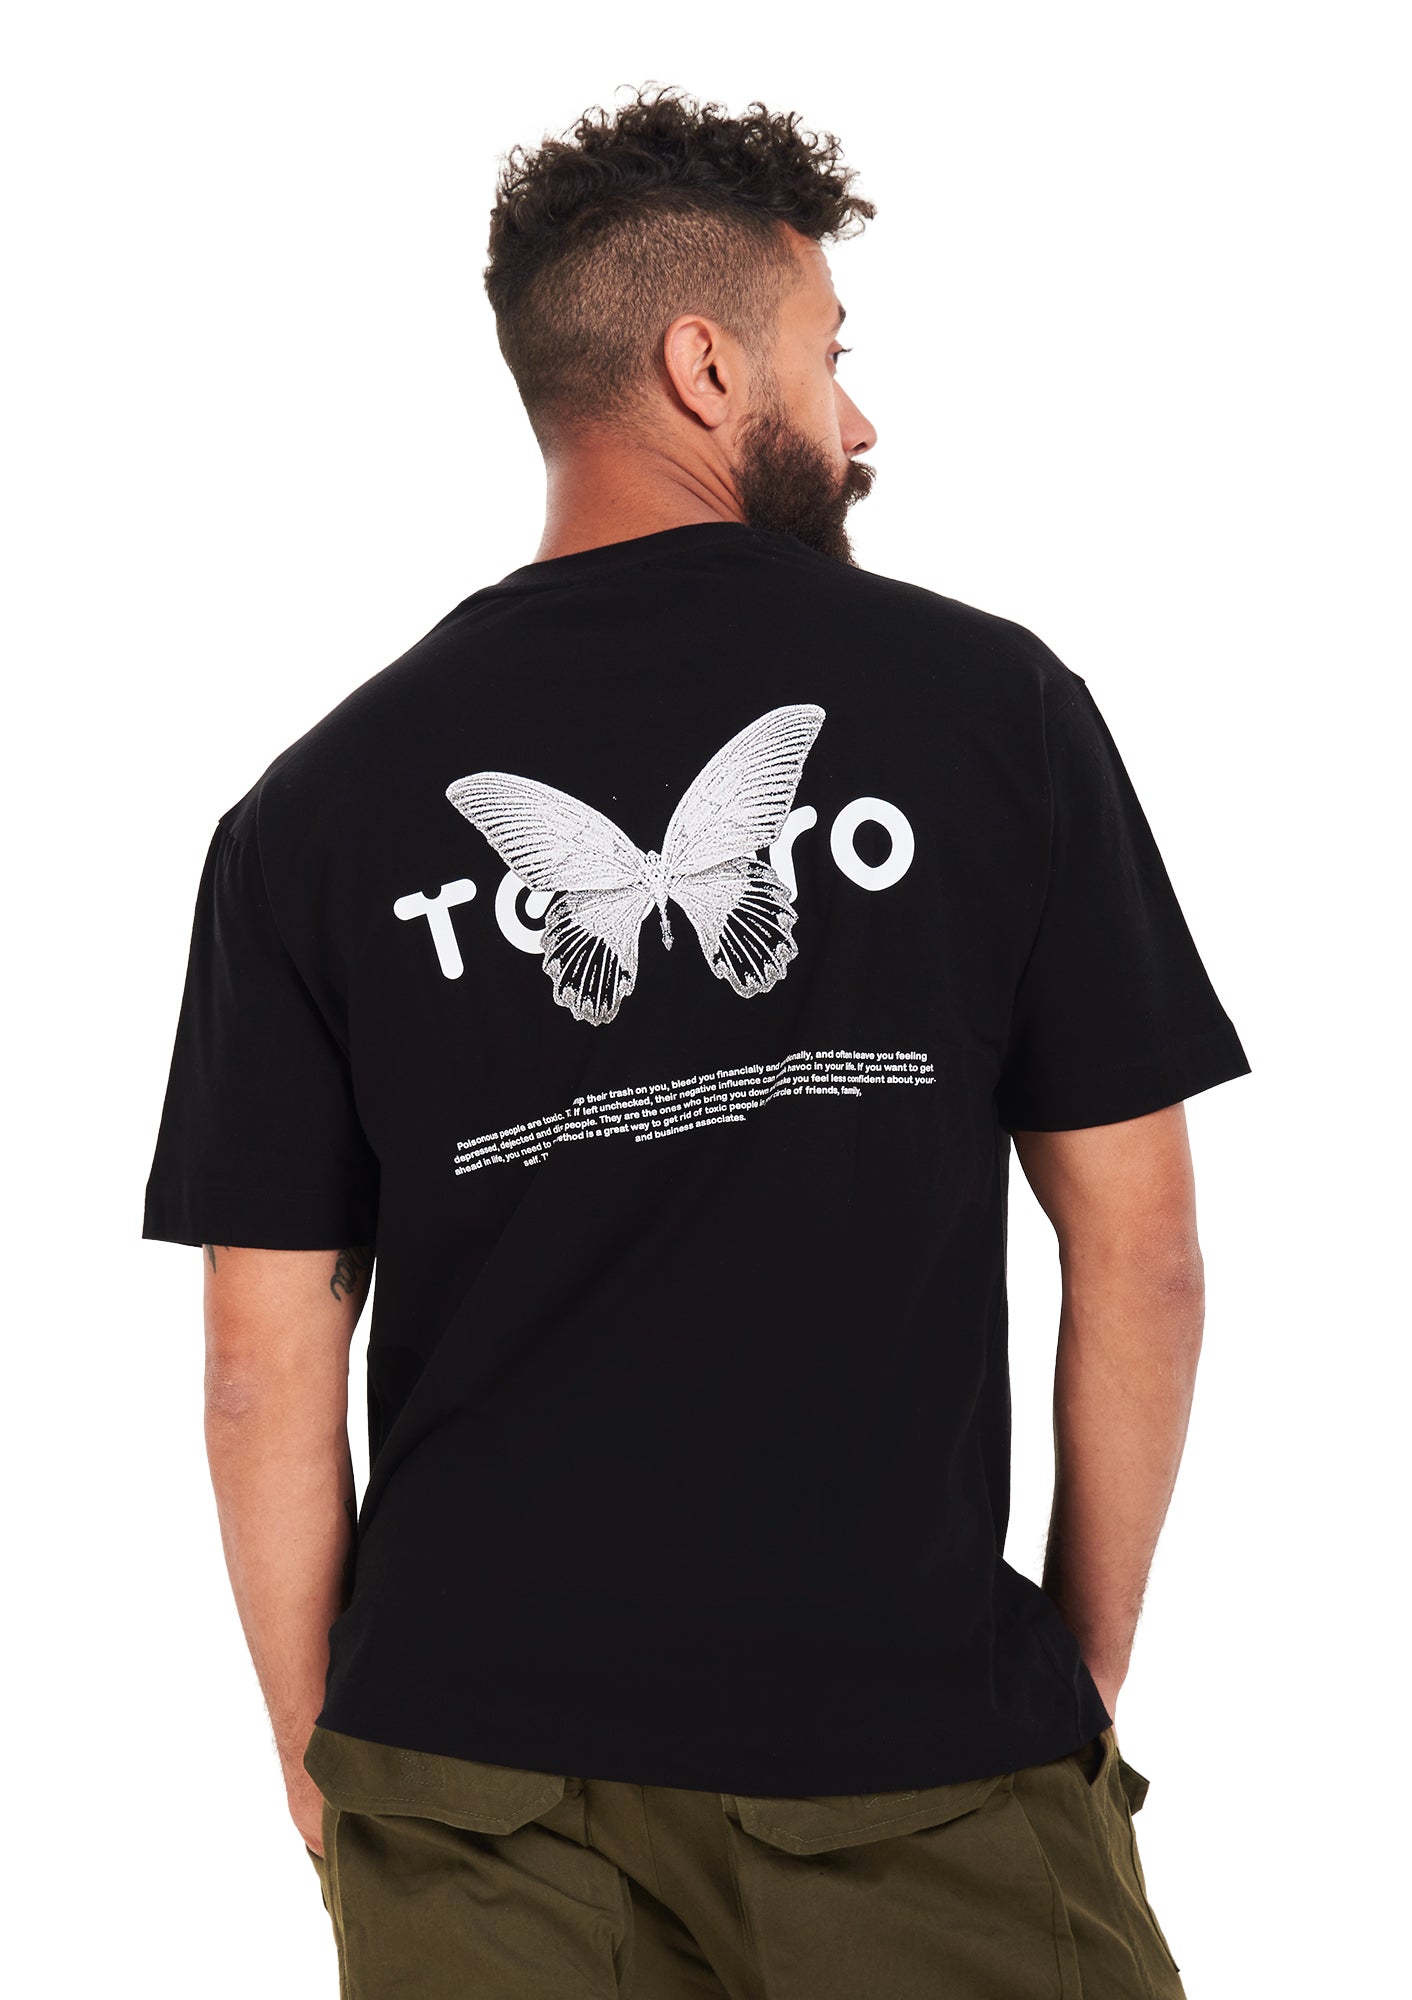 Butterfly tee Oversized printed Black T-shirt .